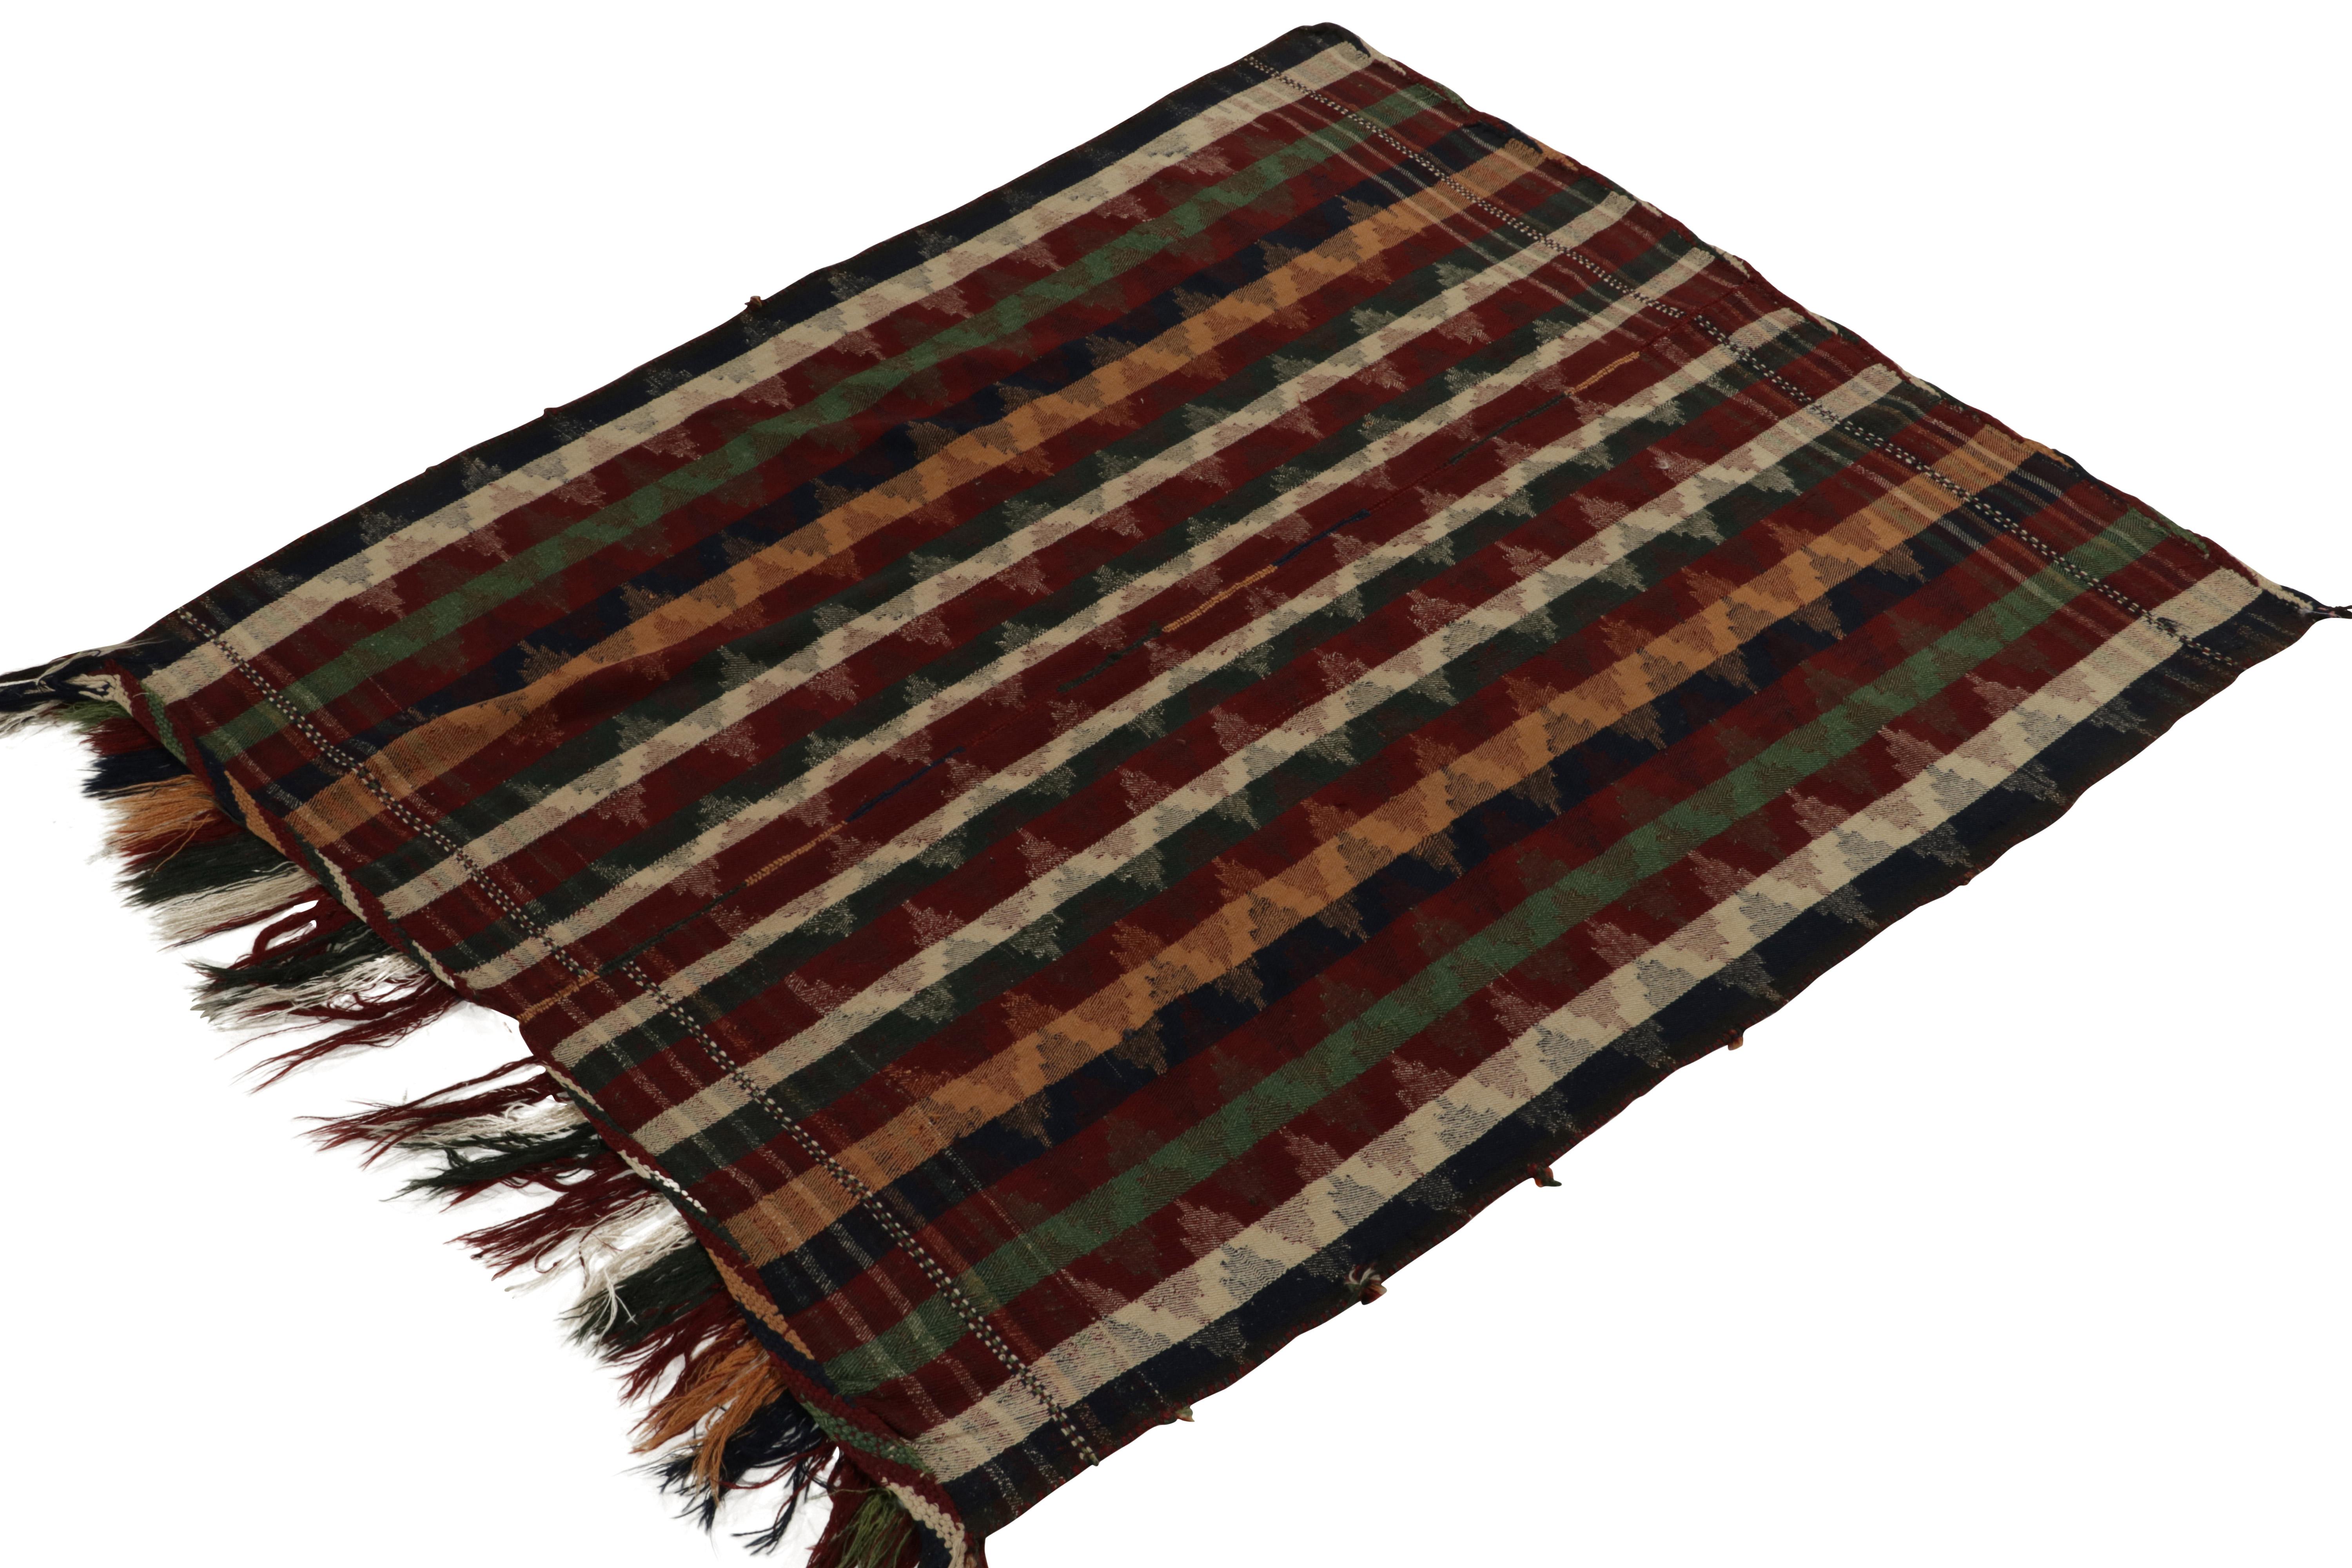 Originating between 1930-1940, a 6x7 antique tribal kilim rug from Turkey. 

Handwoven in all wool, the seemingly simple design witnesses two distinct patterns woven together to enjoy a vibrant marriage of stripes & chevrons. The employment of